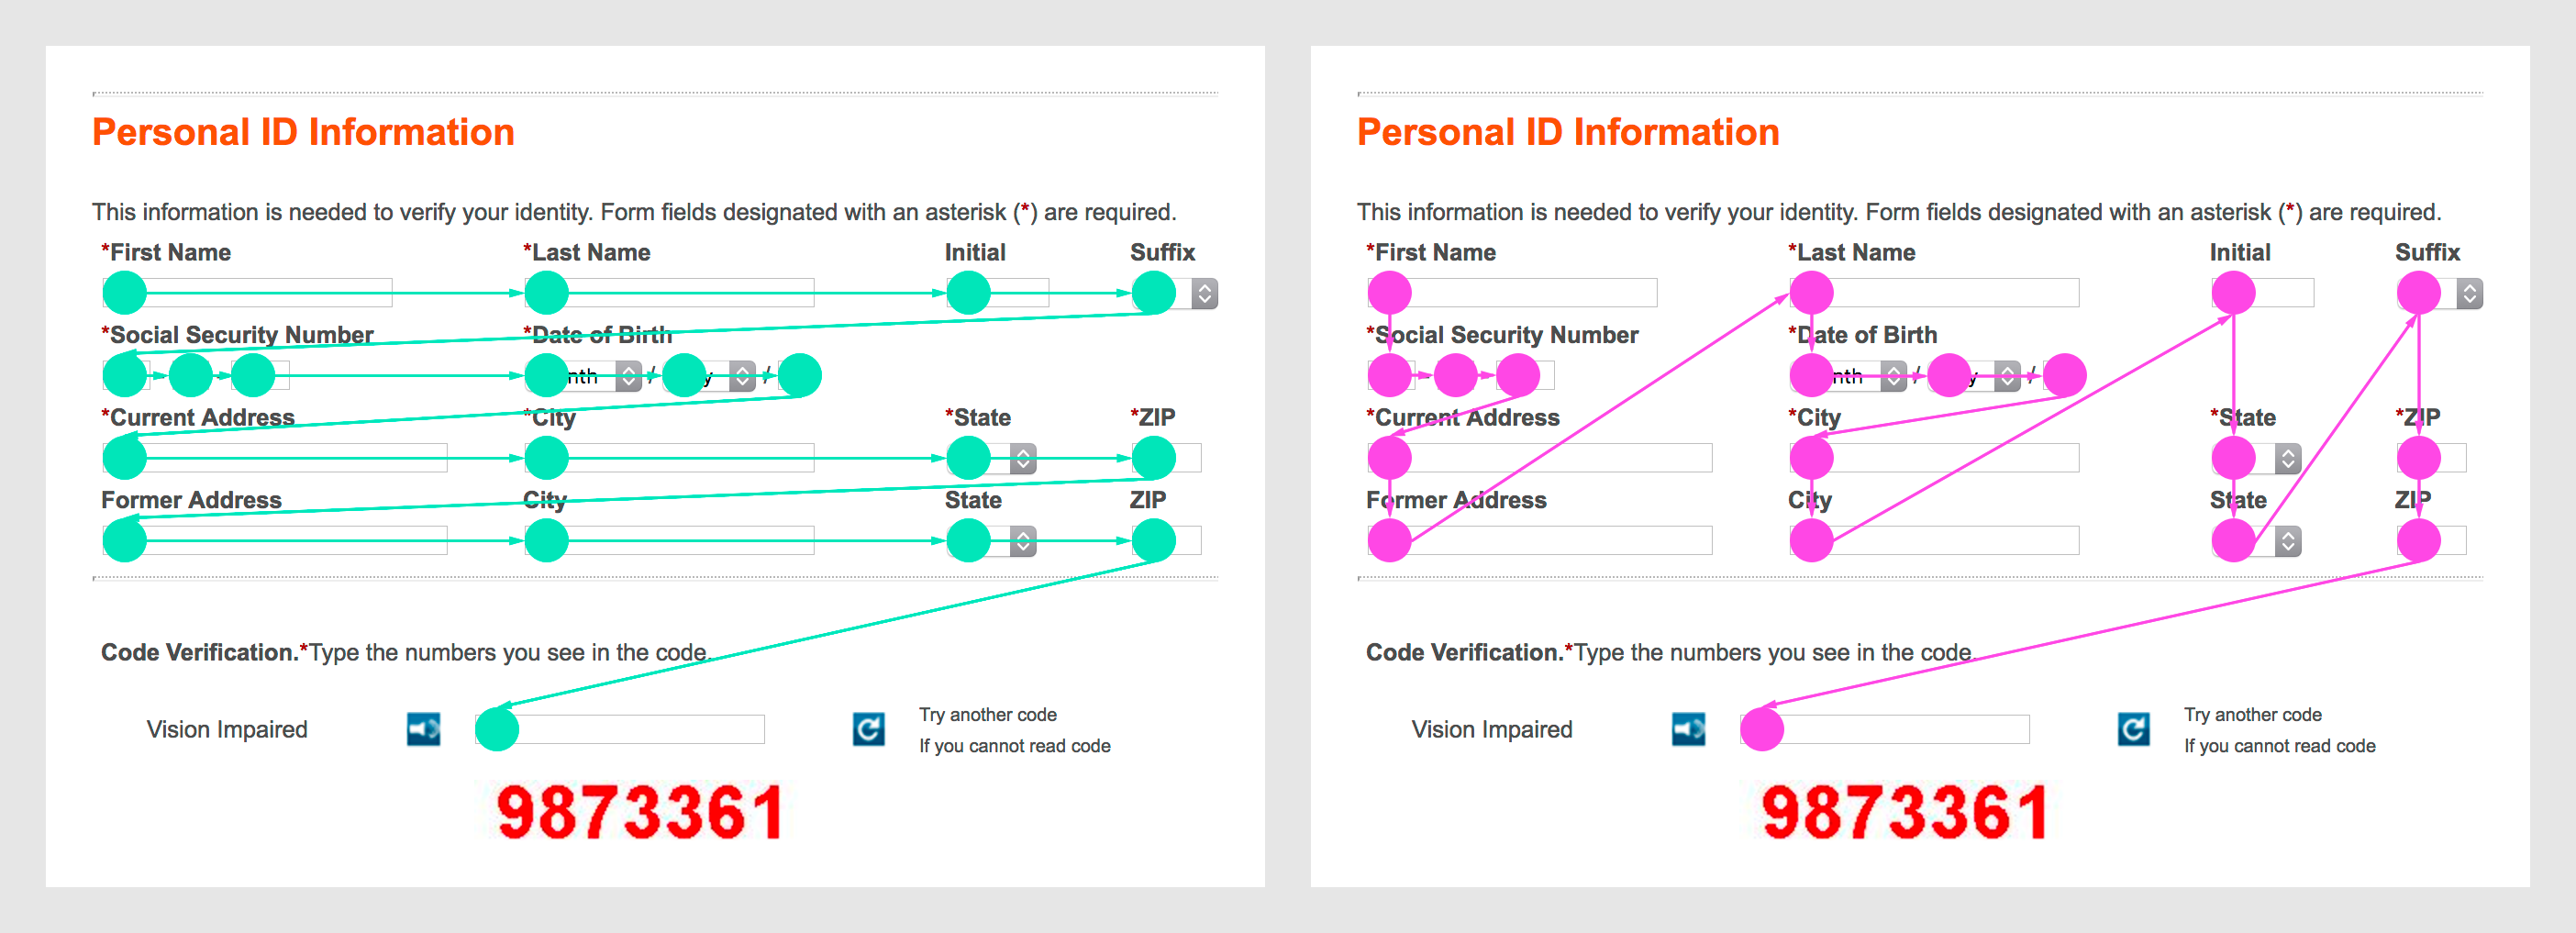 Screenshot illustrating ambiguity in the visual scan pattern of Equifax's form. It is unclear if you are supposed to read the form vertically or horizontally.